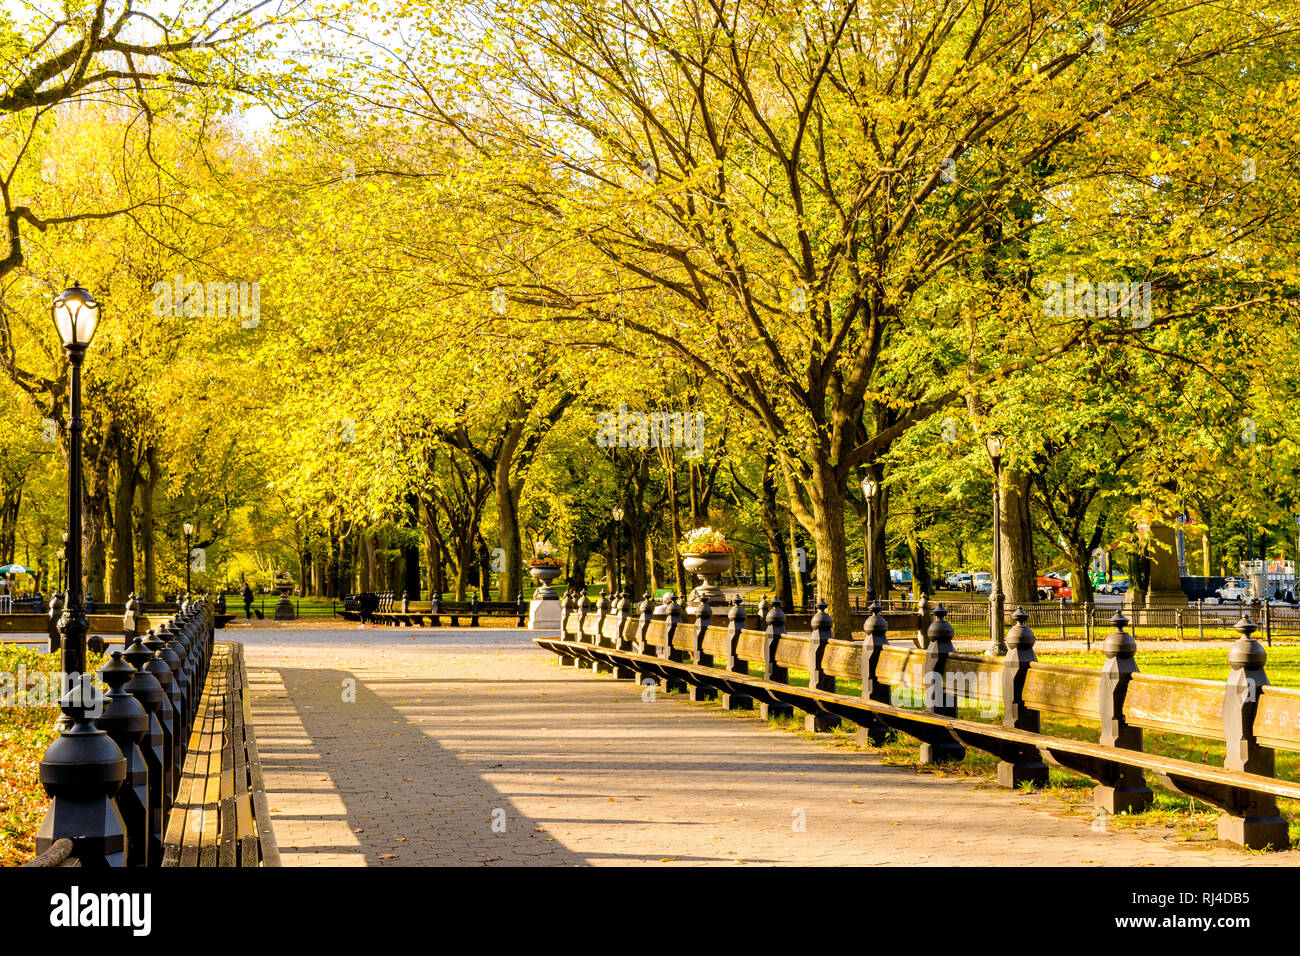 Beautiful scenery inside Central Park New York during the colorful Autumn/Fall season Stock Photo